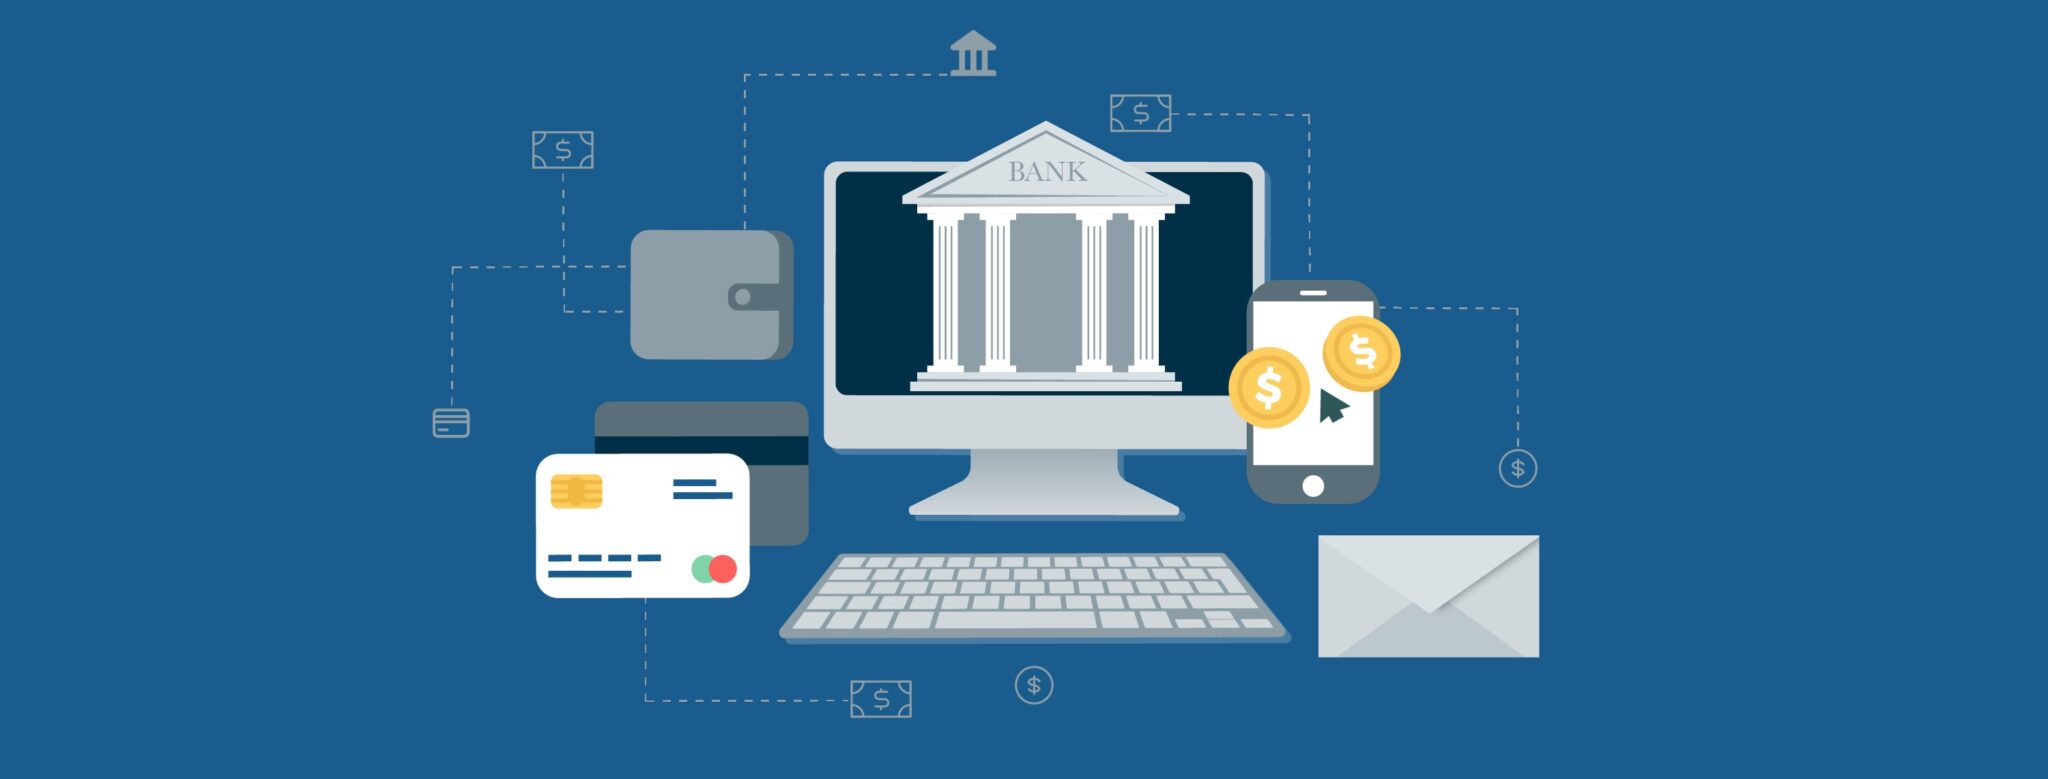 10 Requirements for Building Digital Banking Architecture